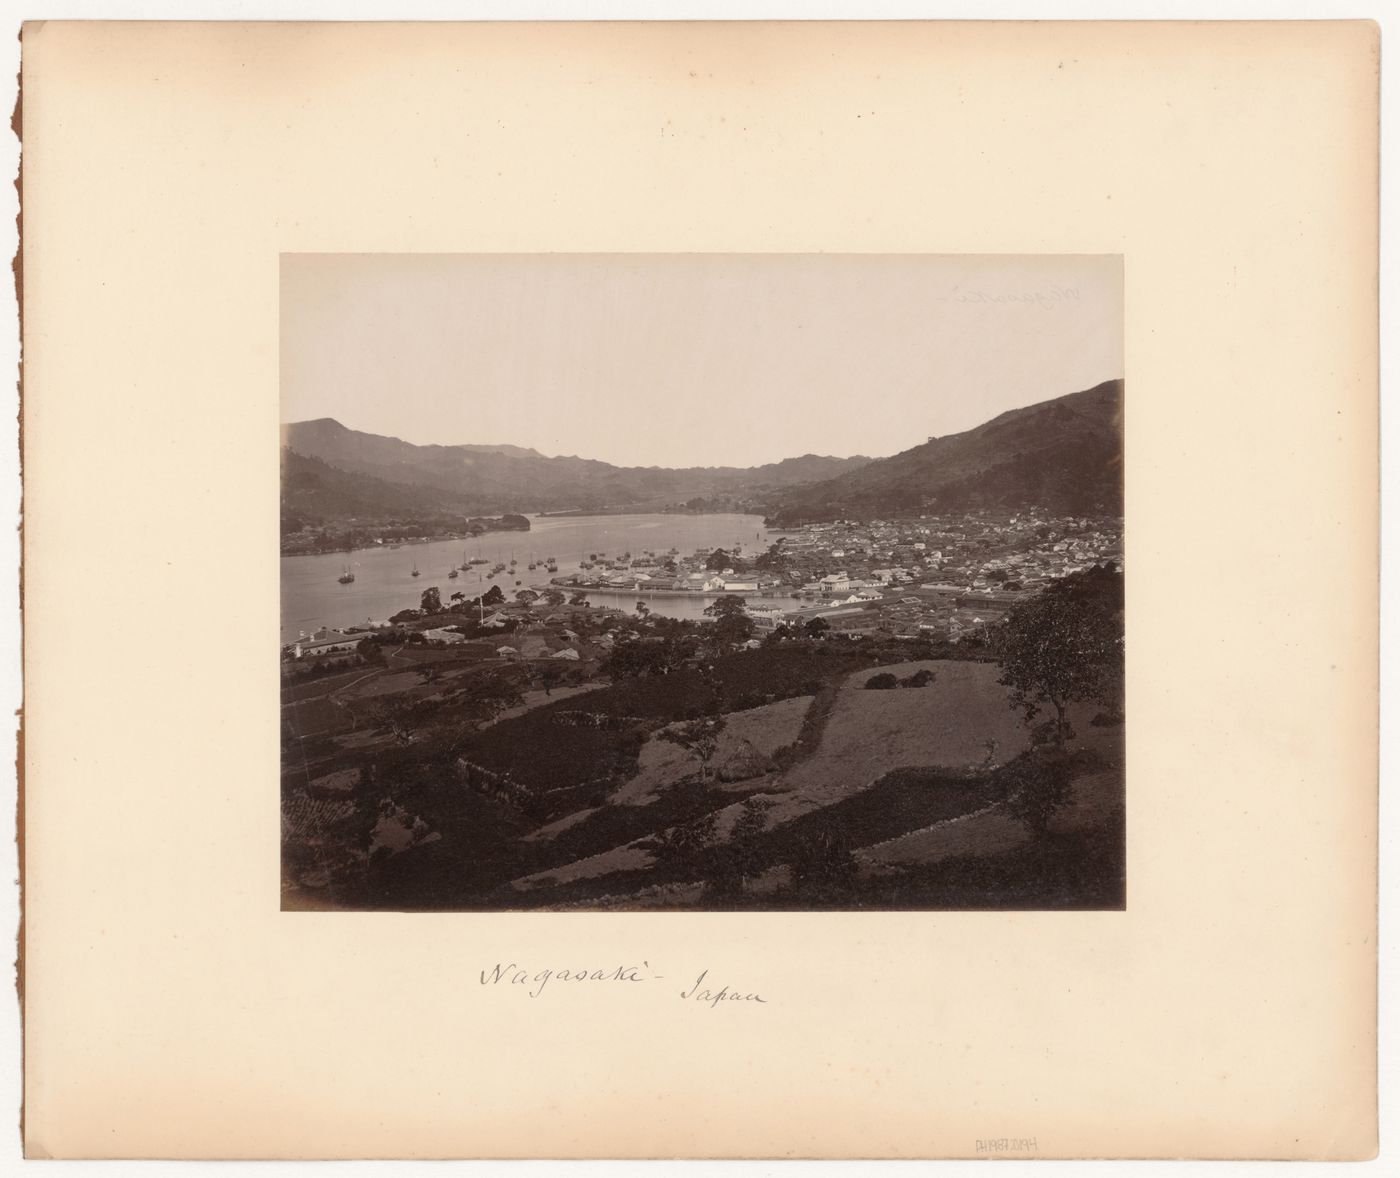 Panoramic view of Nagasaki showing the artificial island of Deshima and the harbour, Japan